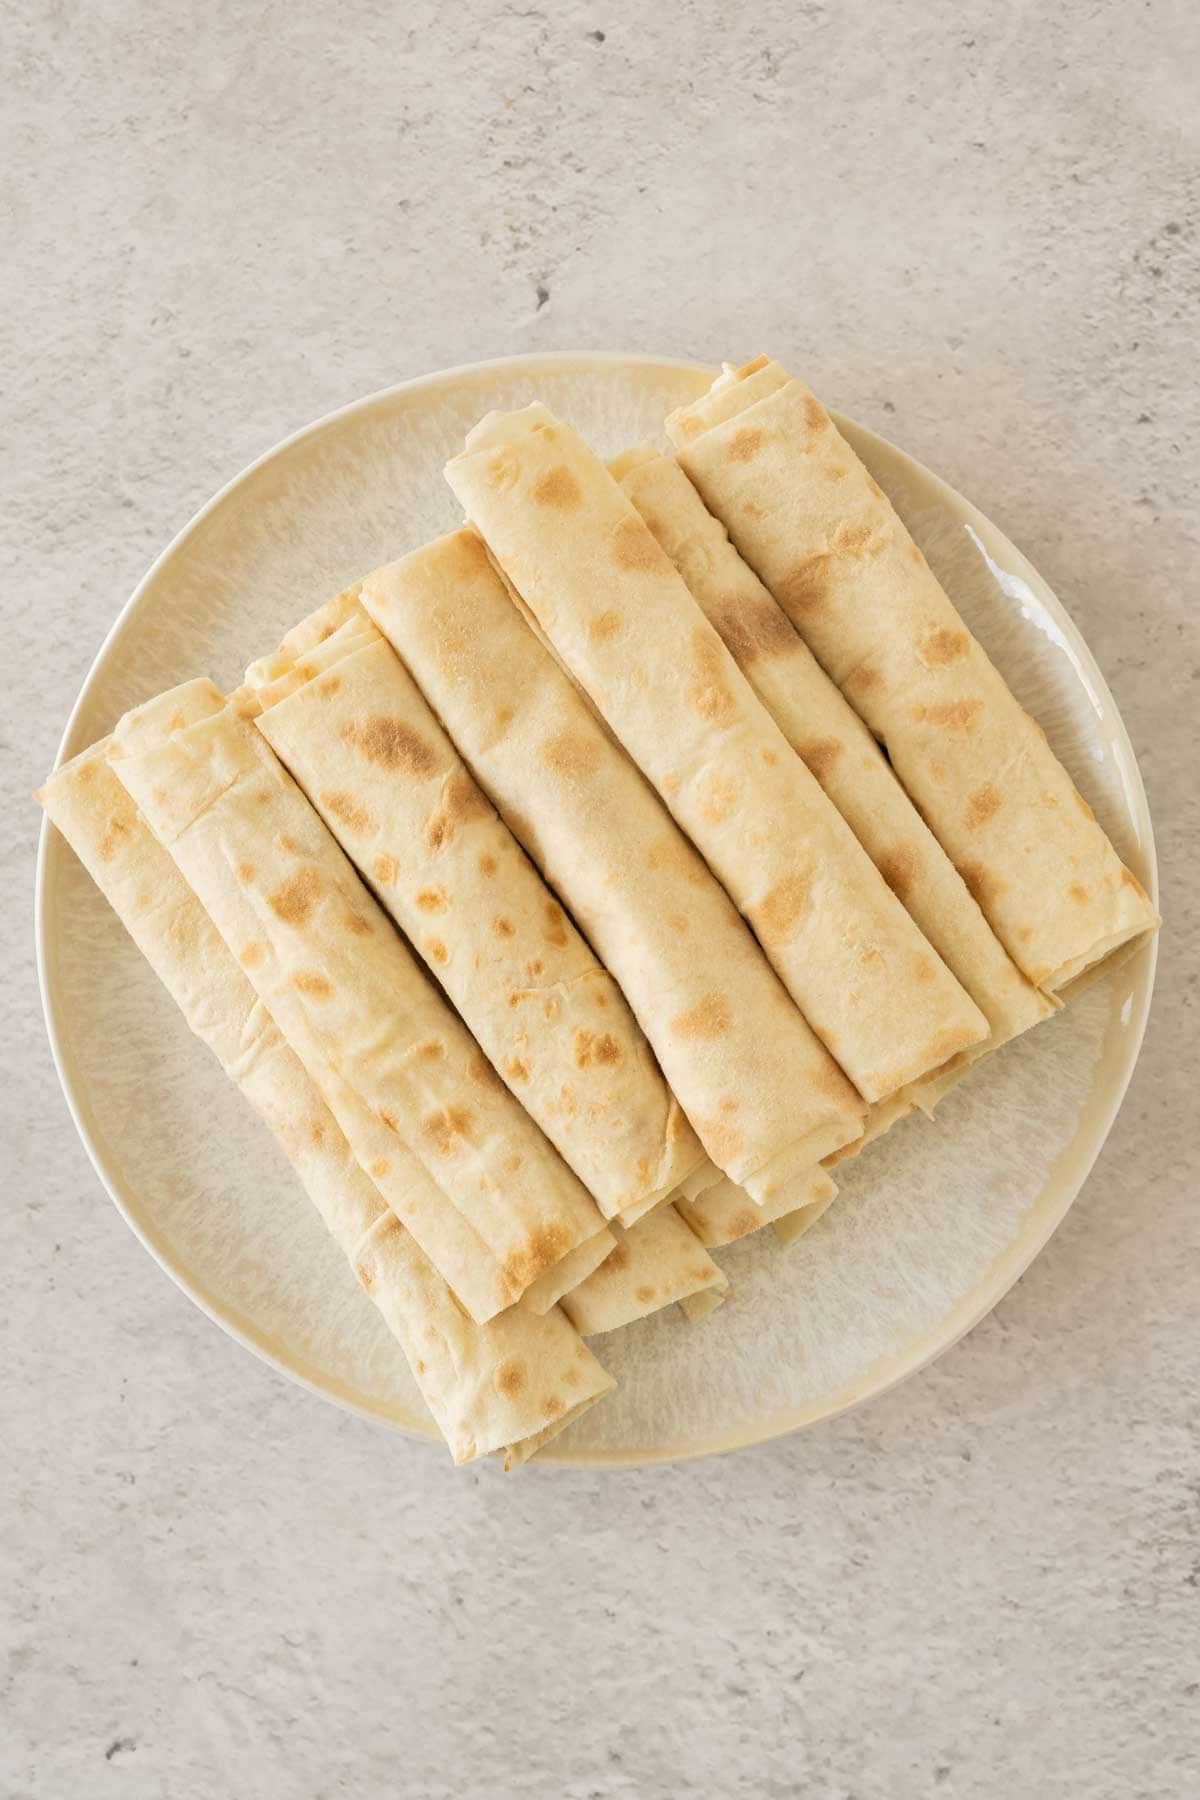 A plate with a stack of uncooked cheese pastry rolls.